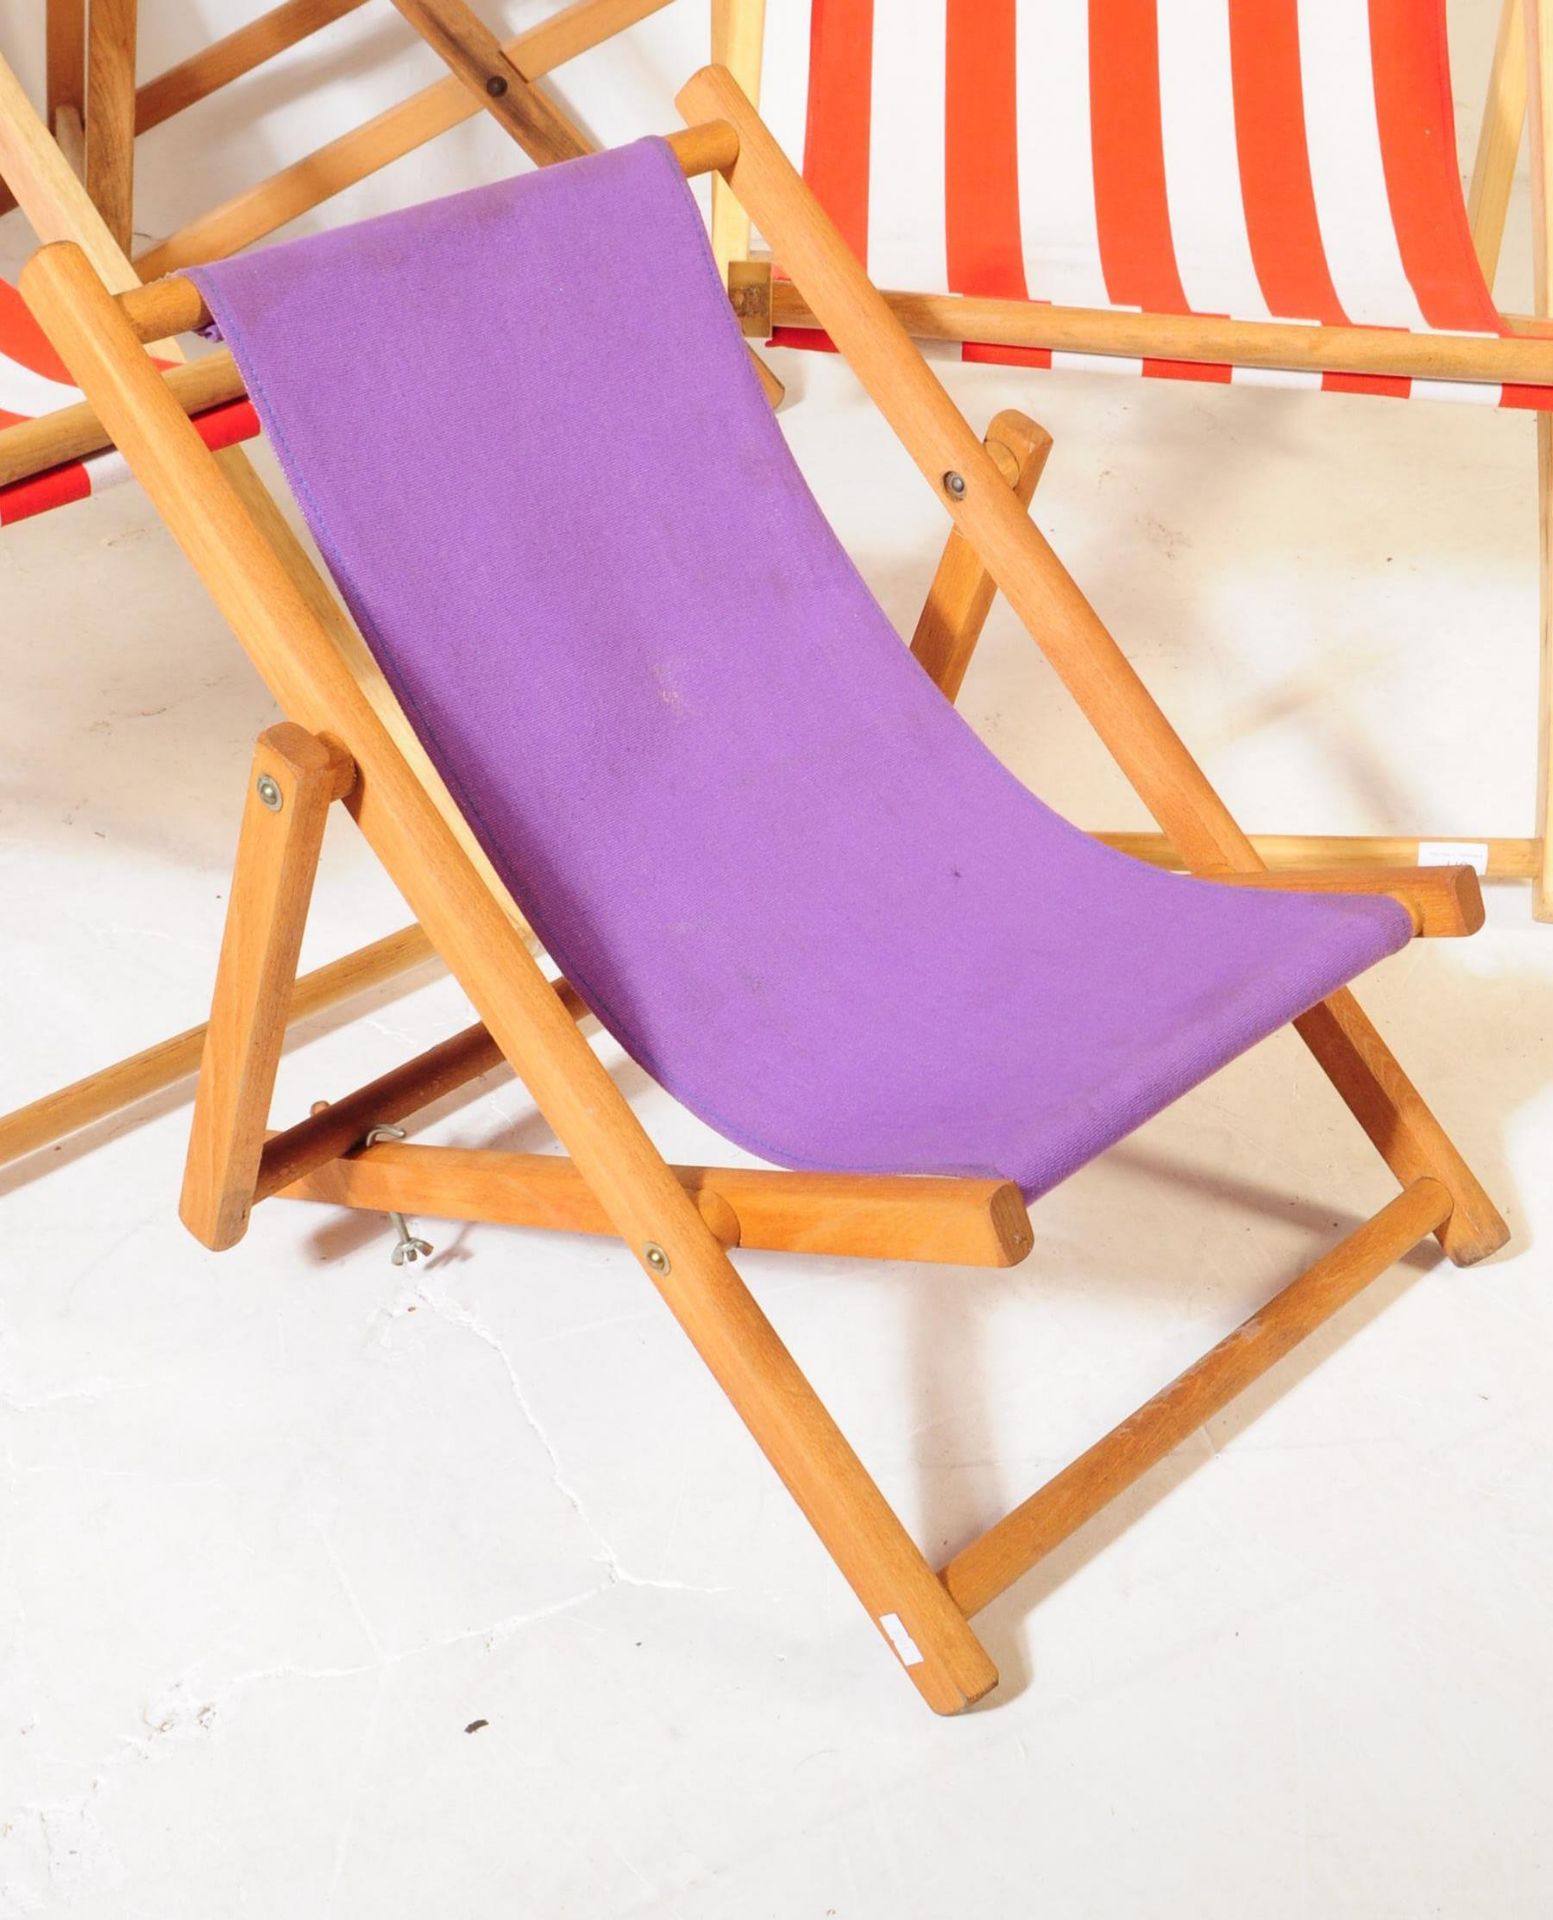 FOUR BEECH WOOD BEACH DECK CHAIRS - Image 4 of 8